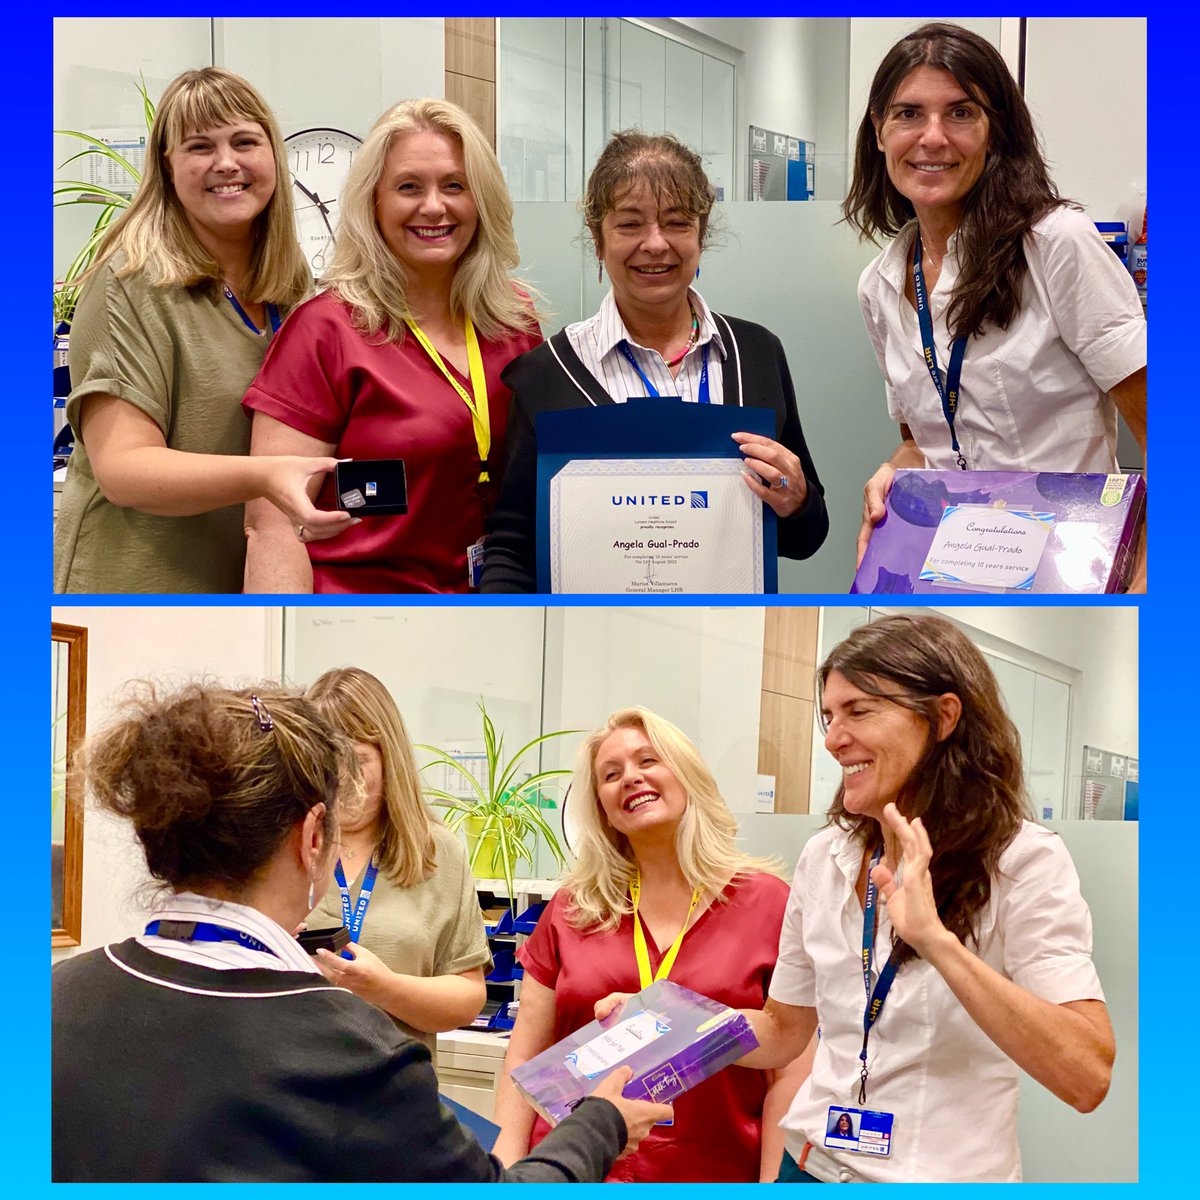 Great to have @marisaatunited & @LucyGUnited join me in presenting a well deserved 10yr milestone to our CSR Angela. Congratulations Angela from all of us @LHR. @weareunited #beingunited @aaronsmythe